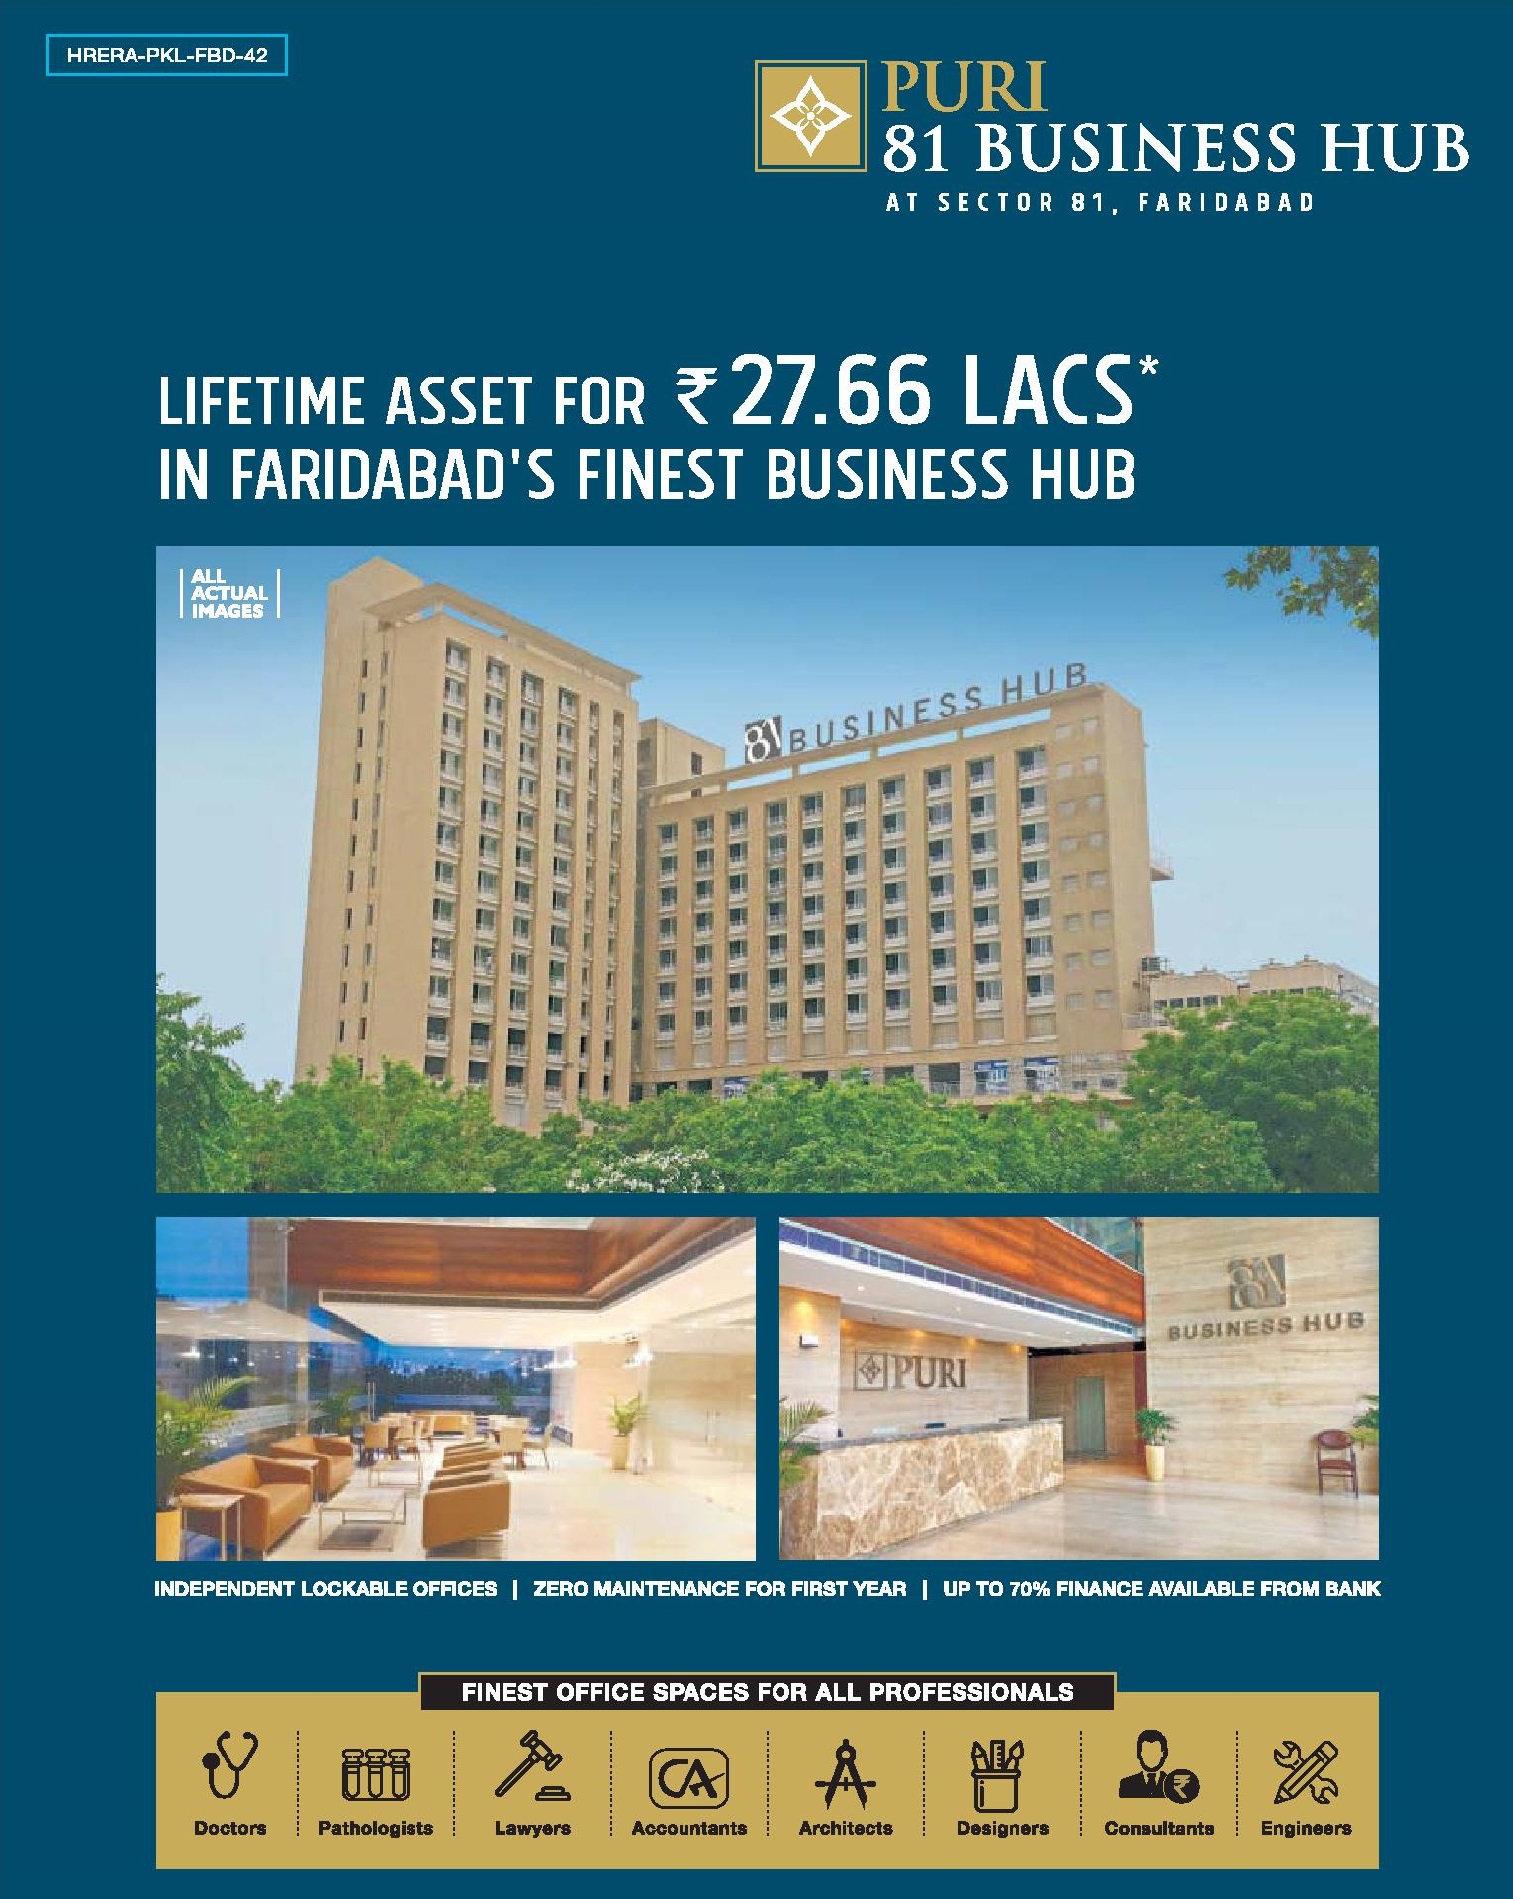 Lifetime asset for Rs. 27.66 lakhs at Puri 81 Business hub in Faridabad